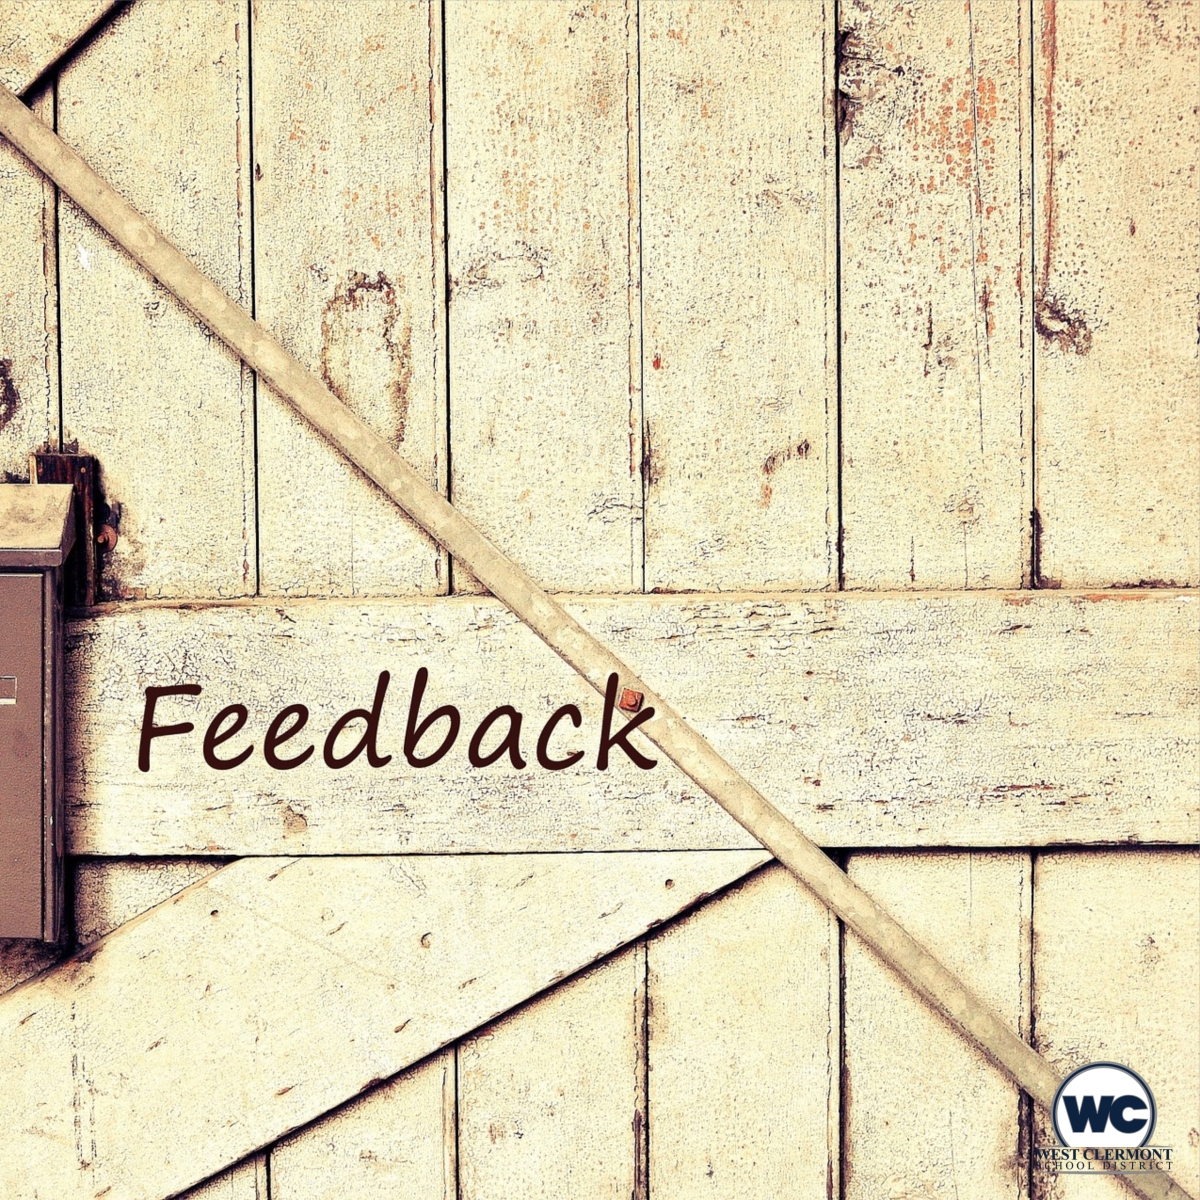 West Clermont Words:  Feedback